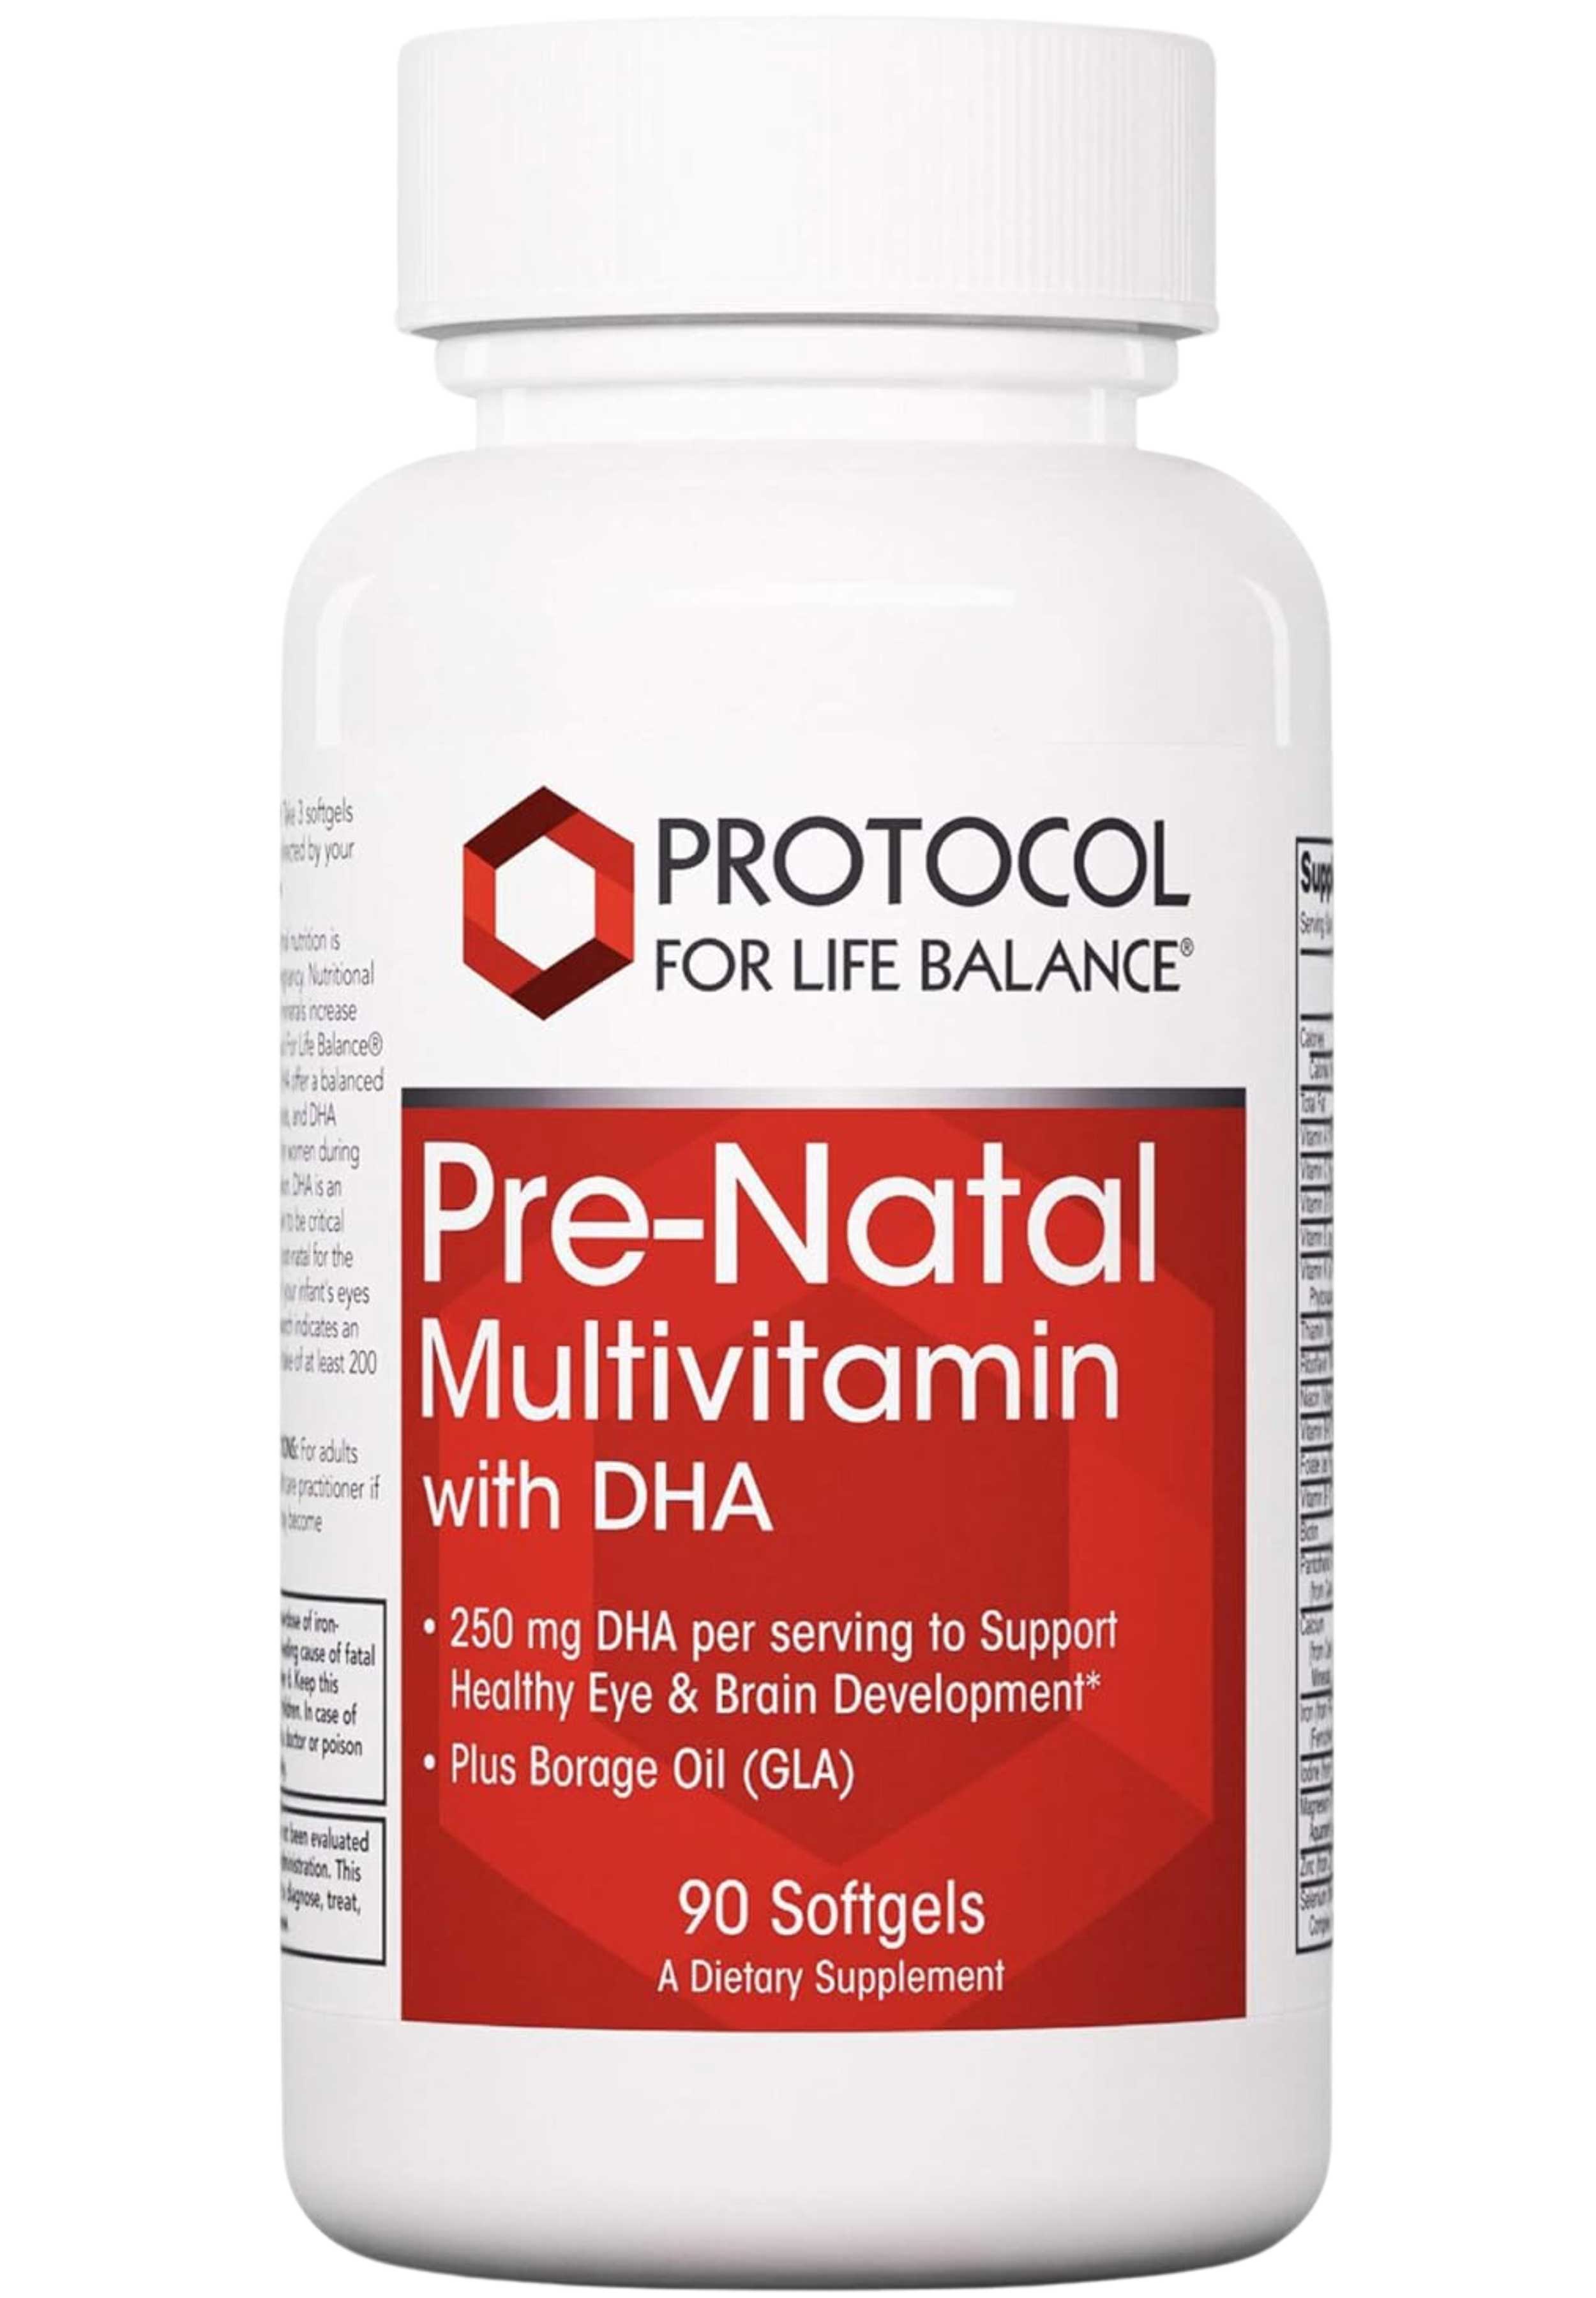 Protocol for Life Balance Pre-Natal Multivitamin with DHA